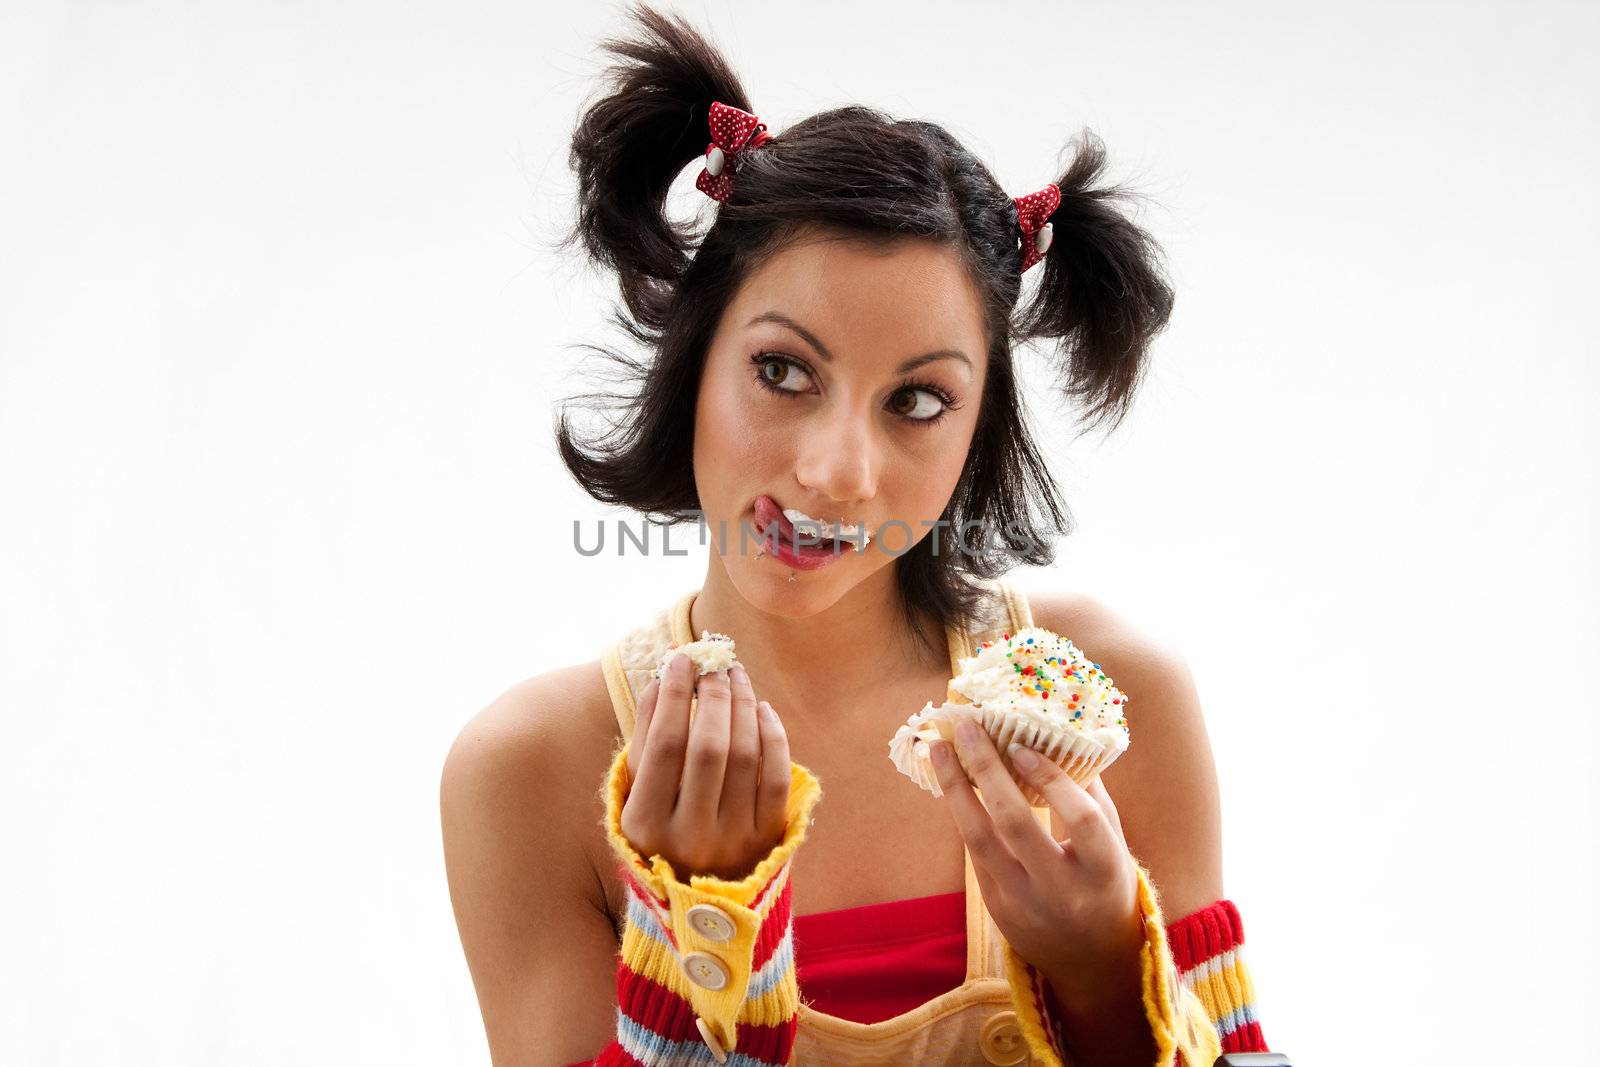 Beautiful Latina girl eating a cupcake with her fingers and licking her icing covered lip, isolated